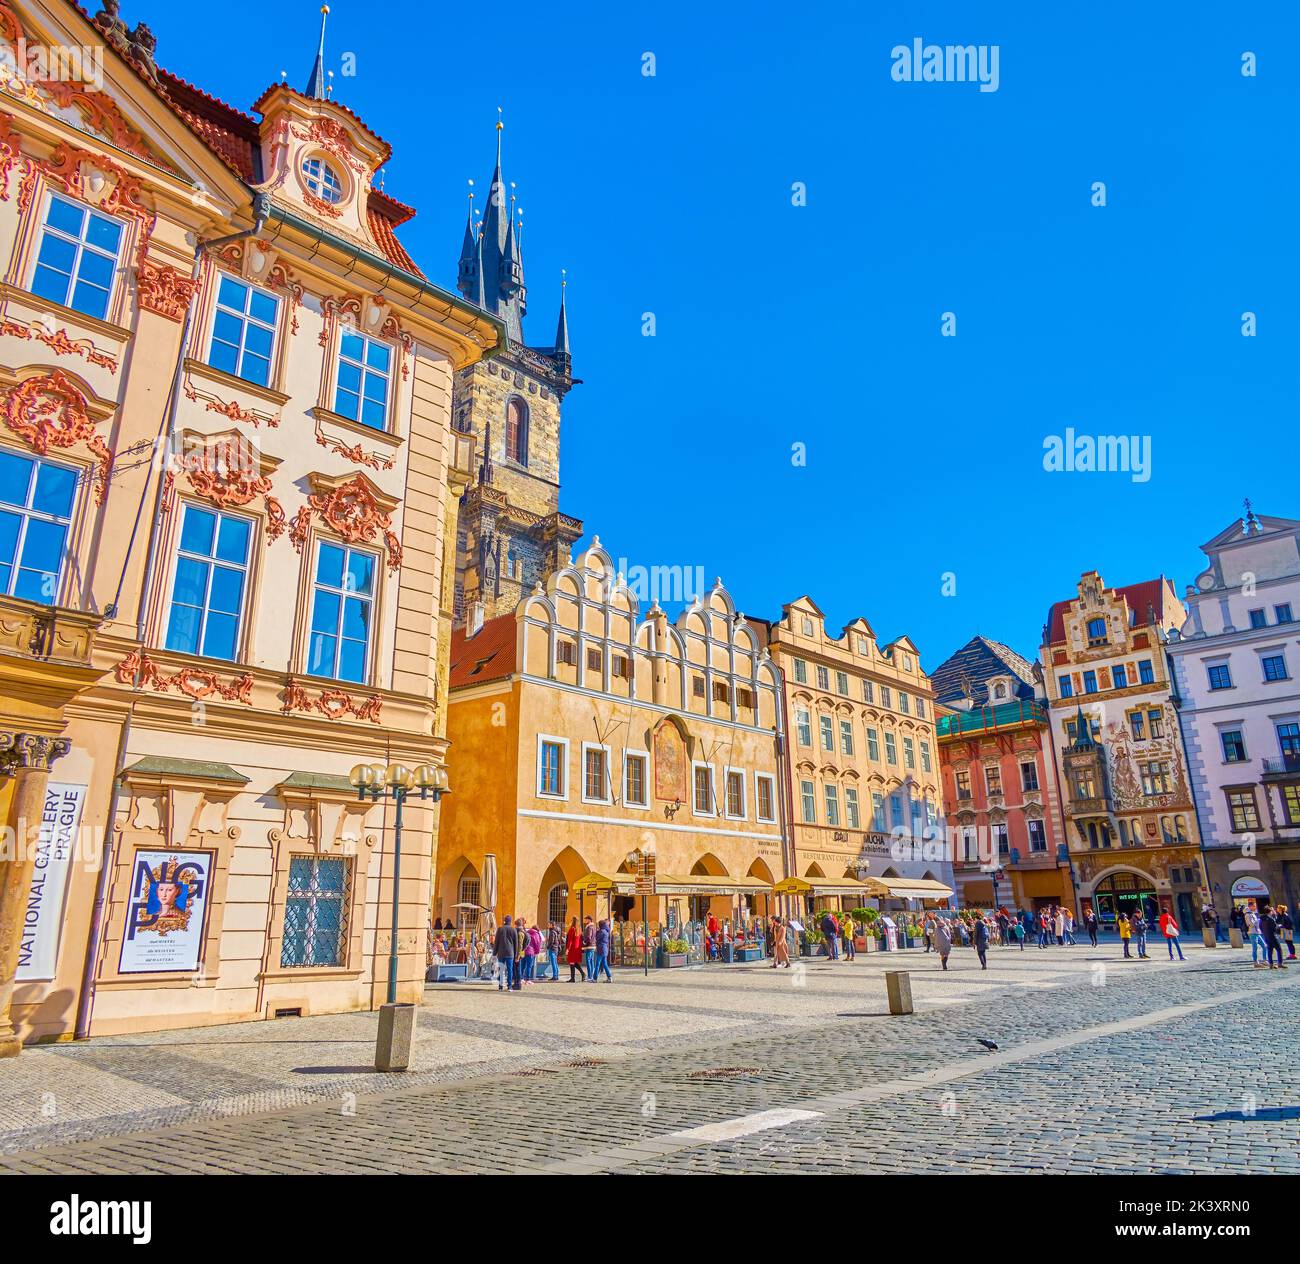 PRAGUE, CZECH REPUBLIC - MARCH 12, 2022: Staromestske namesti, the central square with historical landmarks and popular restaurants, on March 12 in Pr Stock Photo